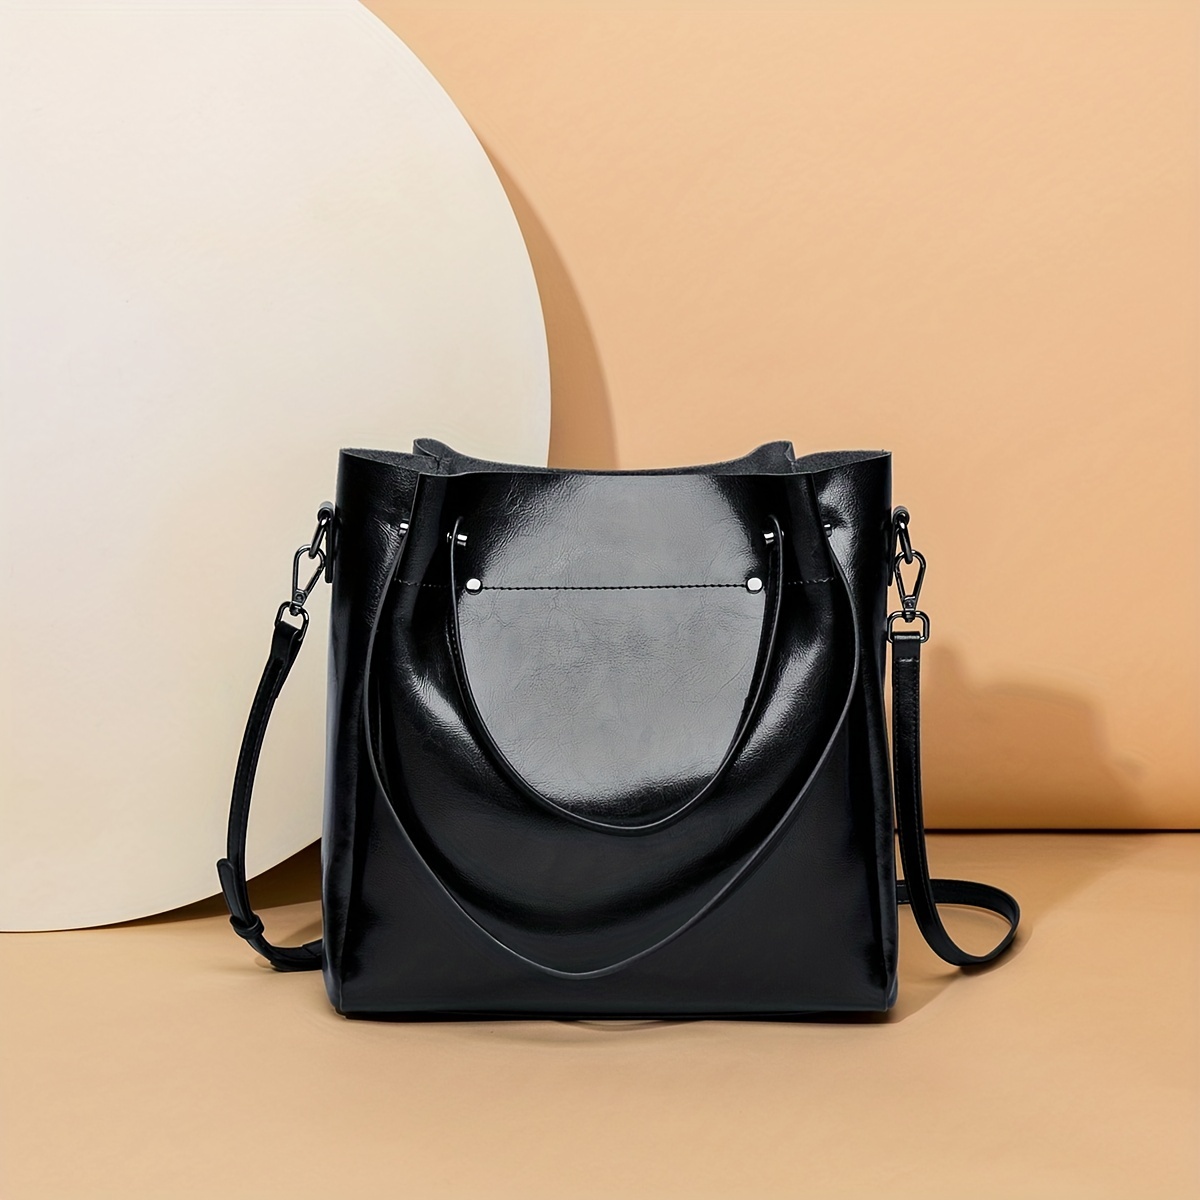 1pc Black Large Capacity Soft Tote With High-end Feeling Can Be Used As  Handbag, Shoulder Bag Or Crossbody Bag, Fashionable And Versatile For Four  Seasons And Commuting